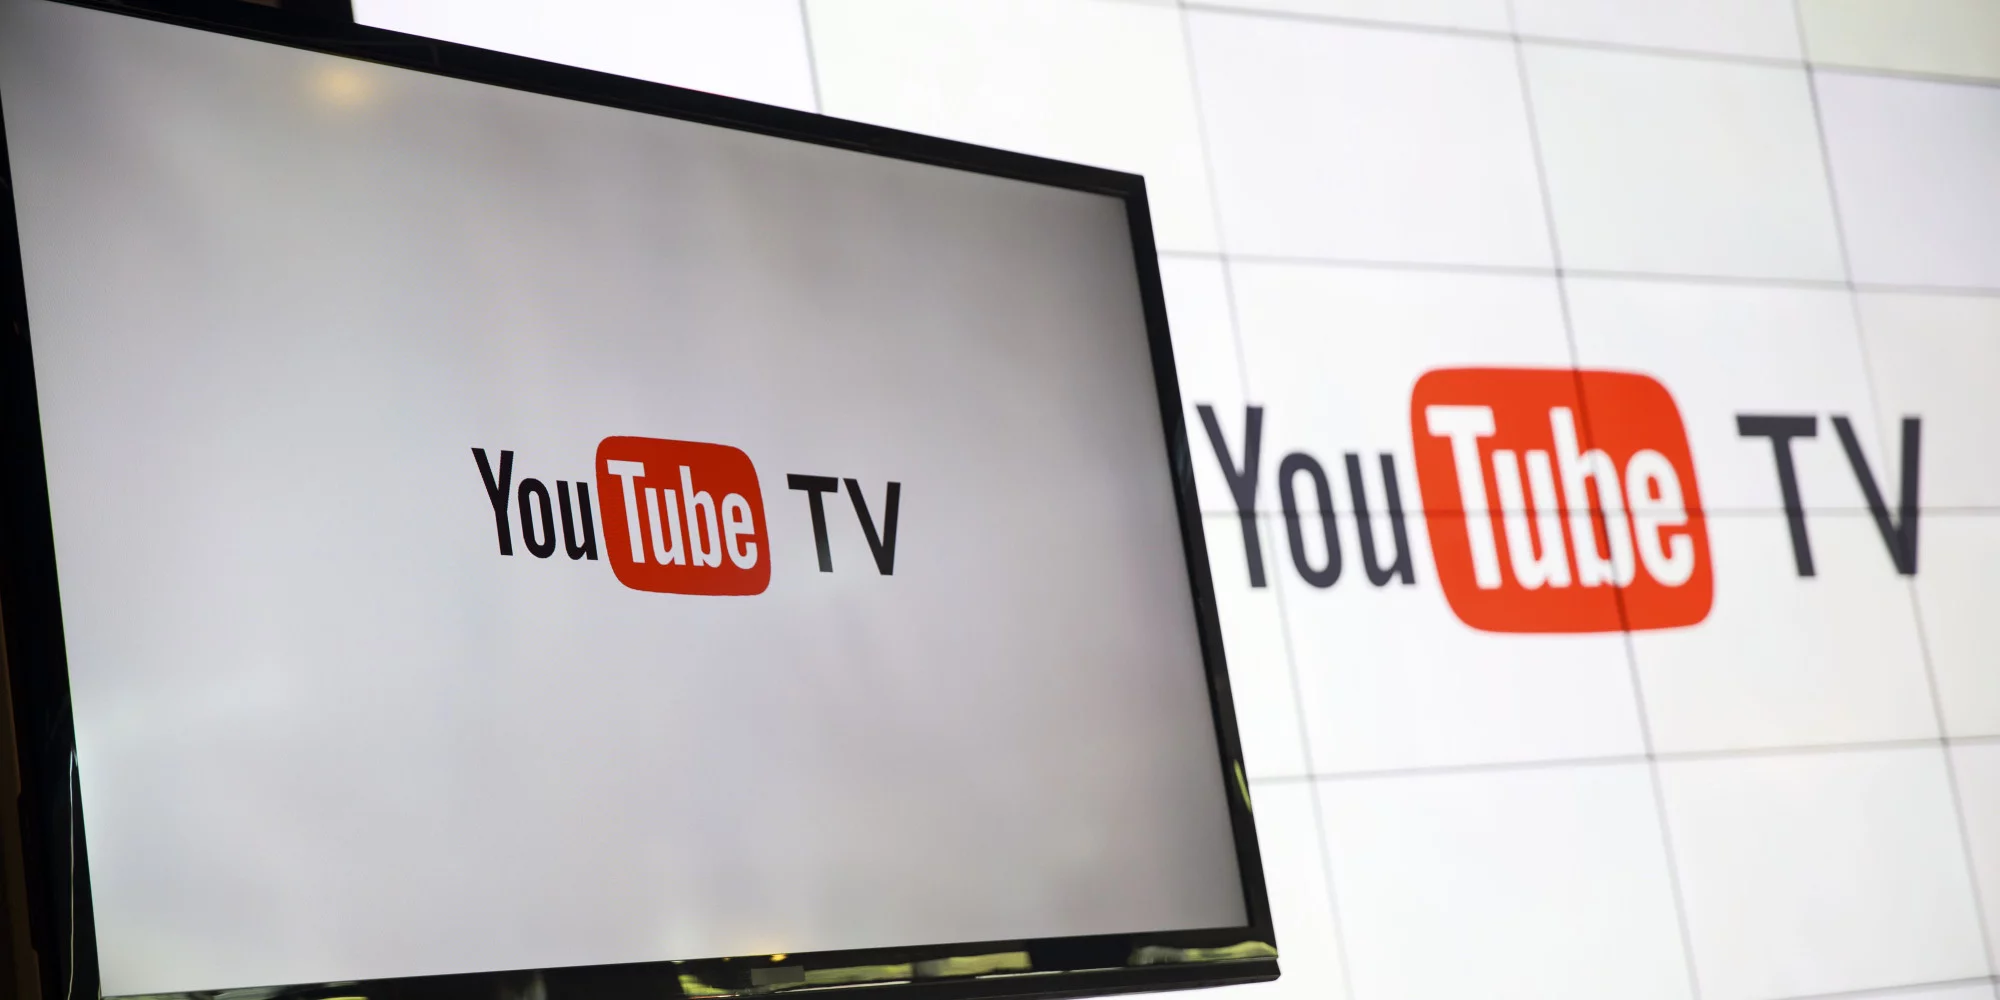 YouTube’s live TV package is coming to 10 more cities